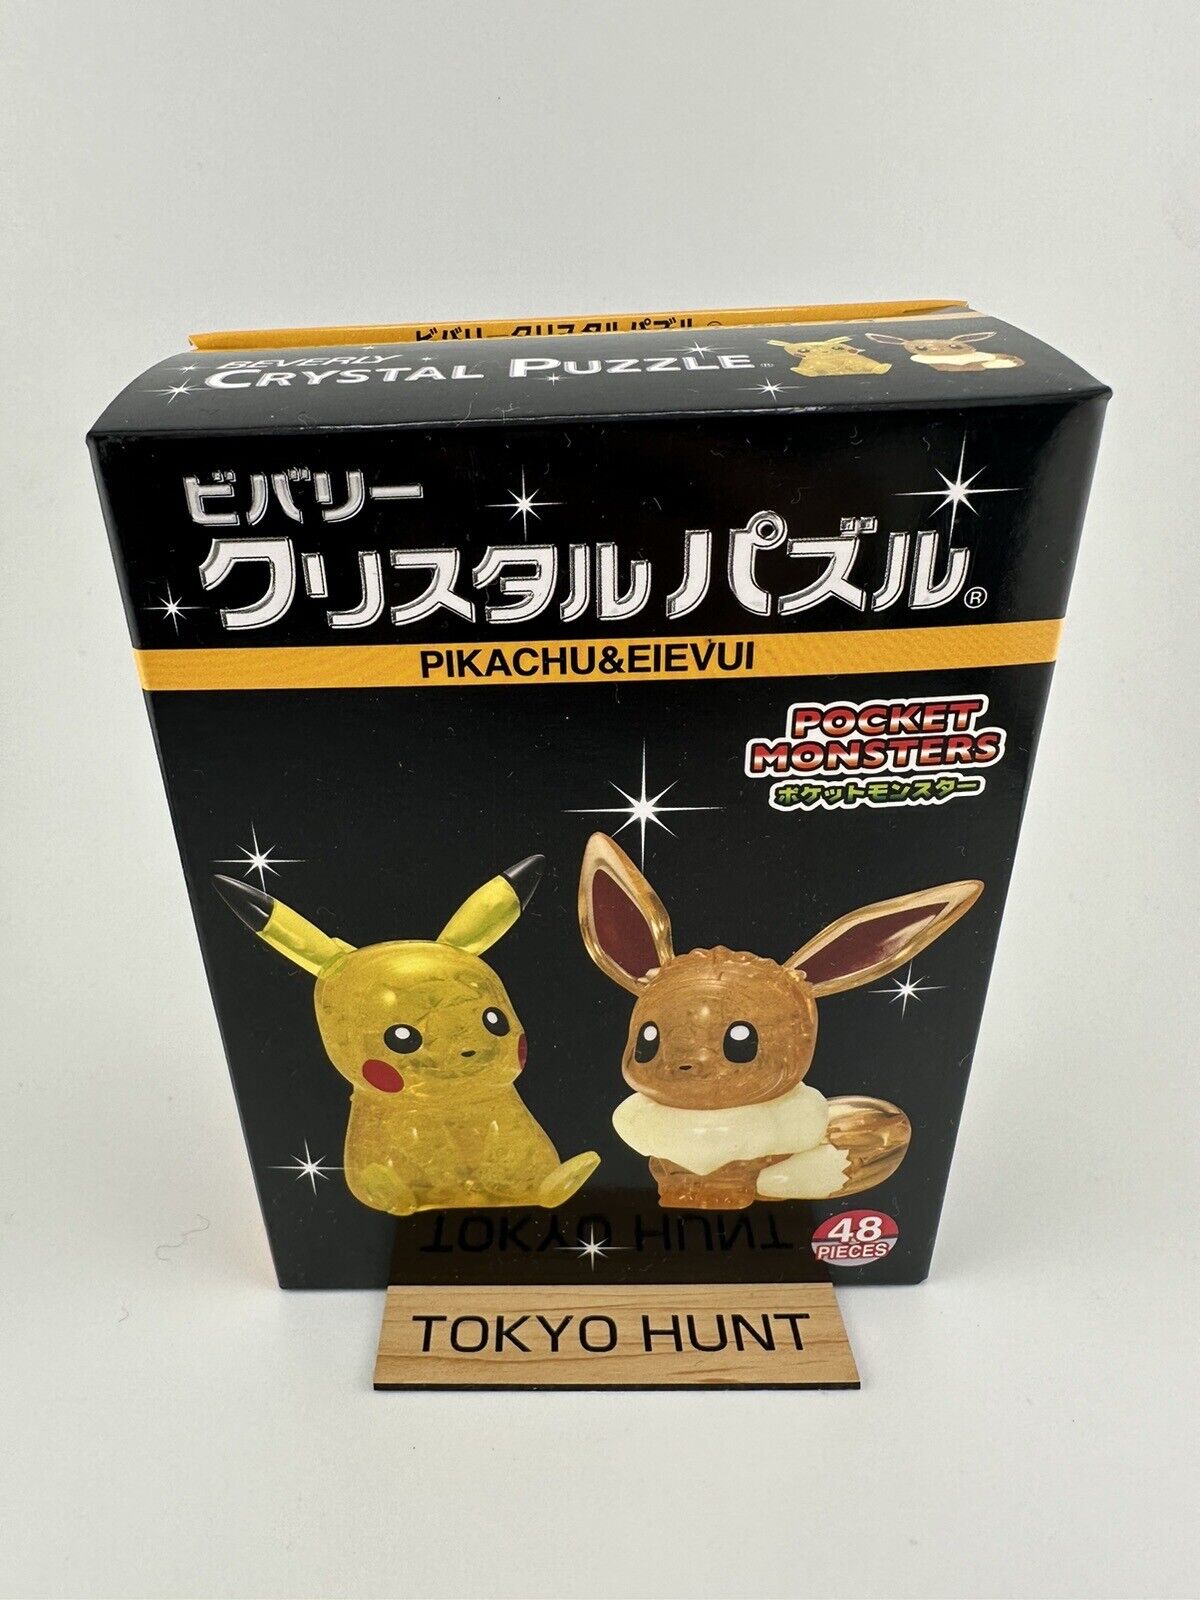 Beverly Pokemon Crystal 3D Jigsaw Puzzle 48pc Pikachu Eevee 50247 F/S Japan New